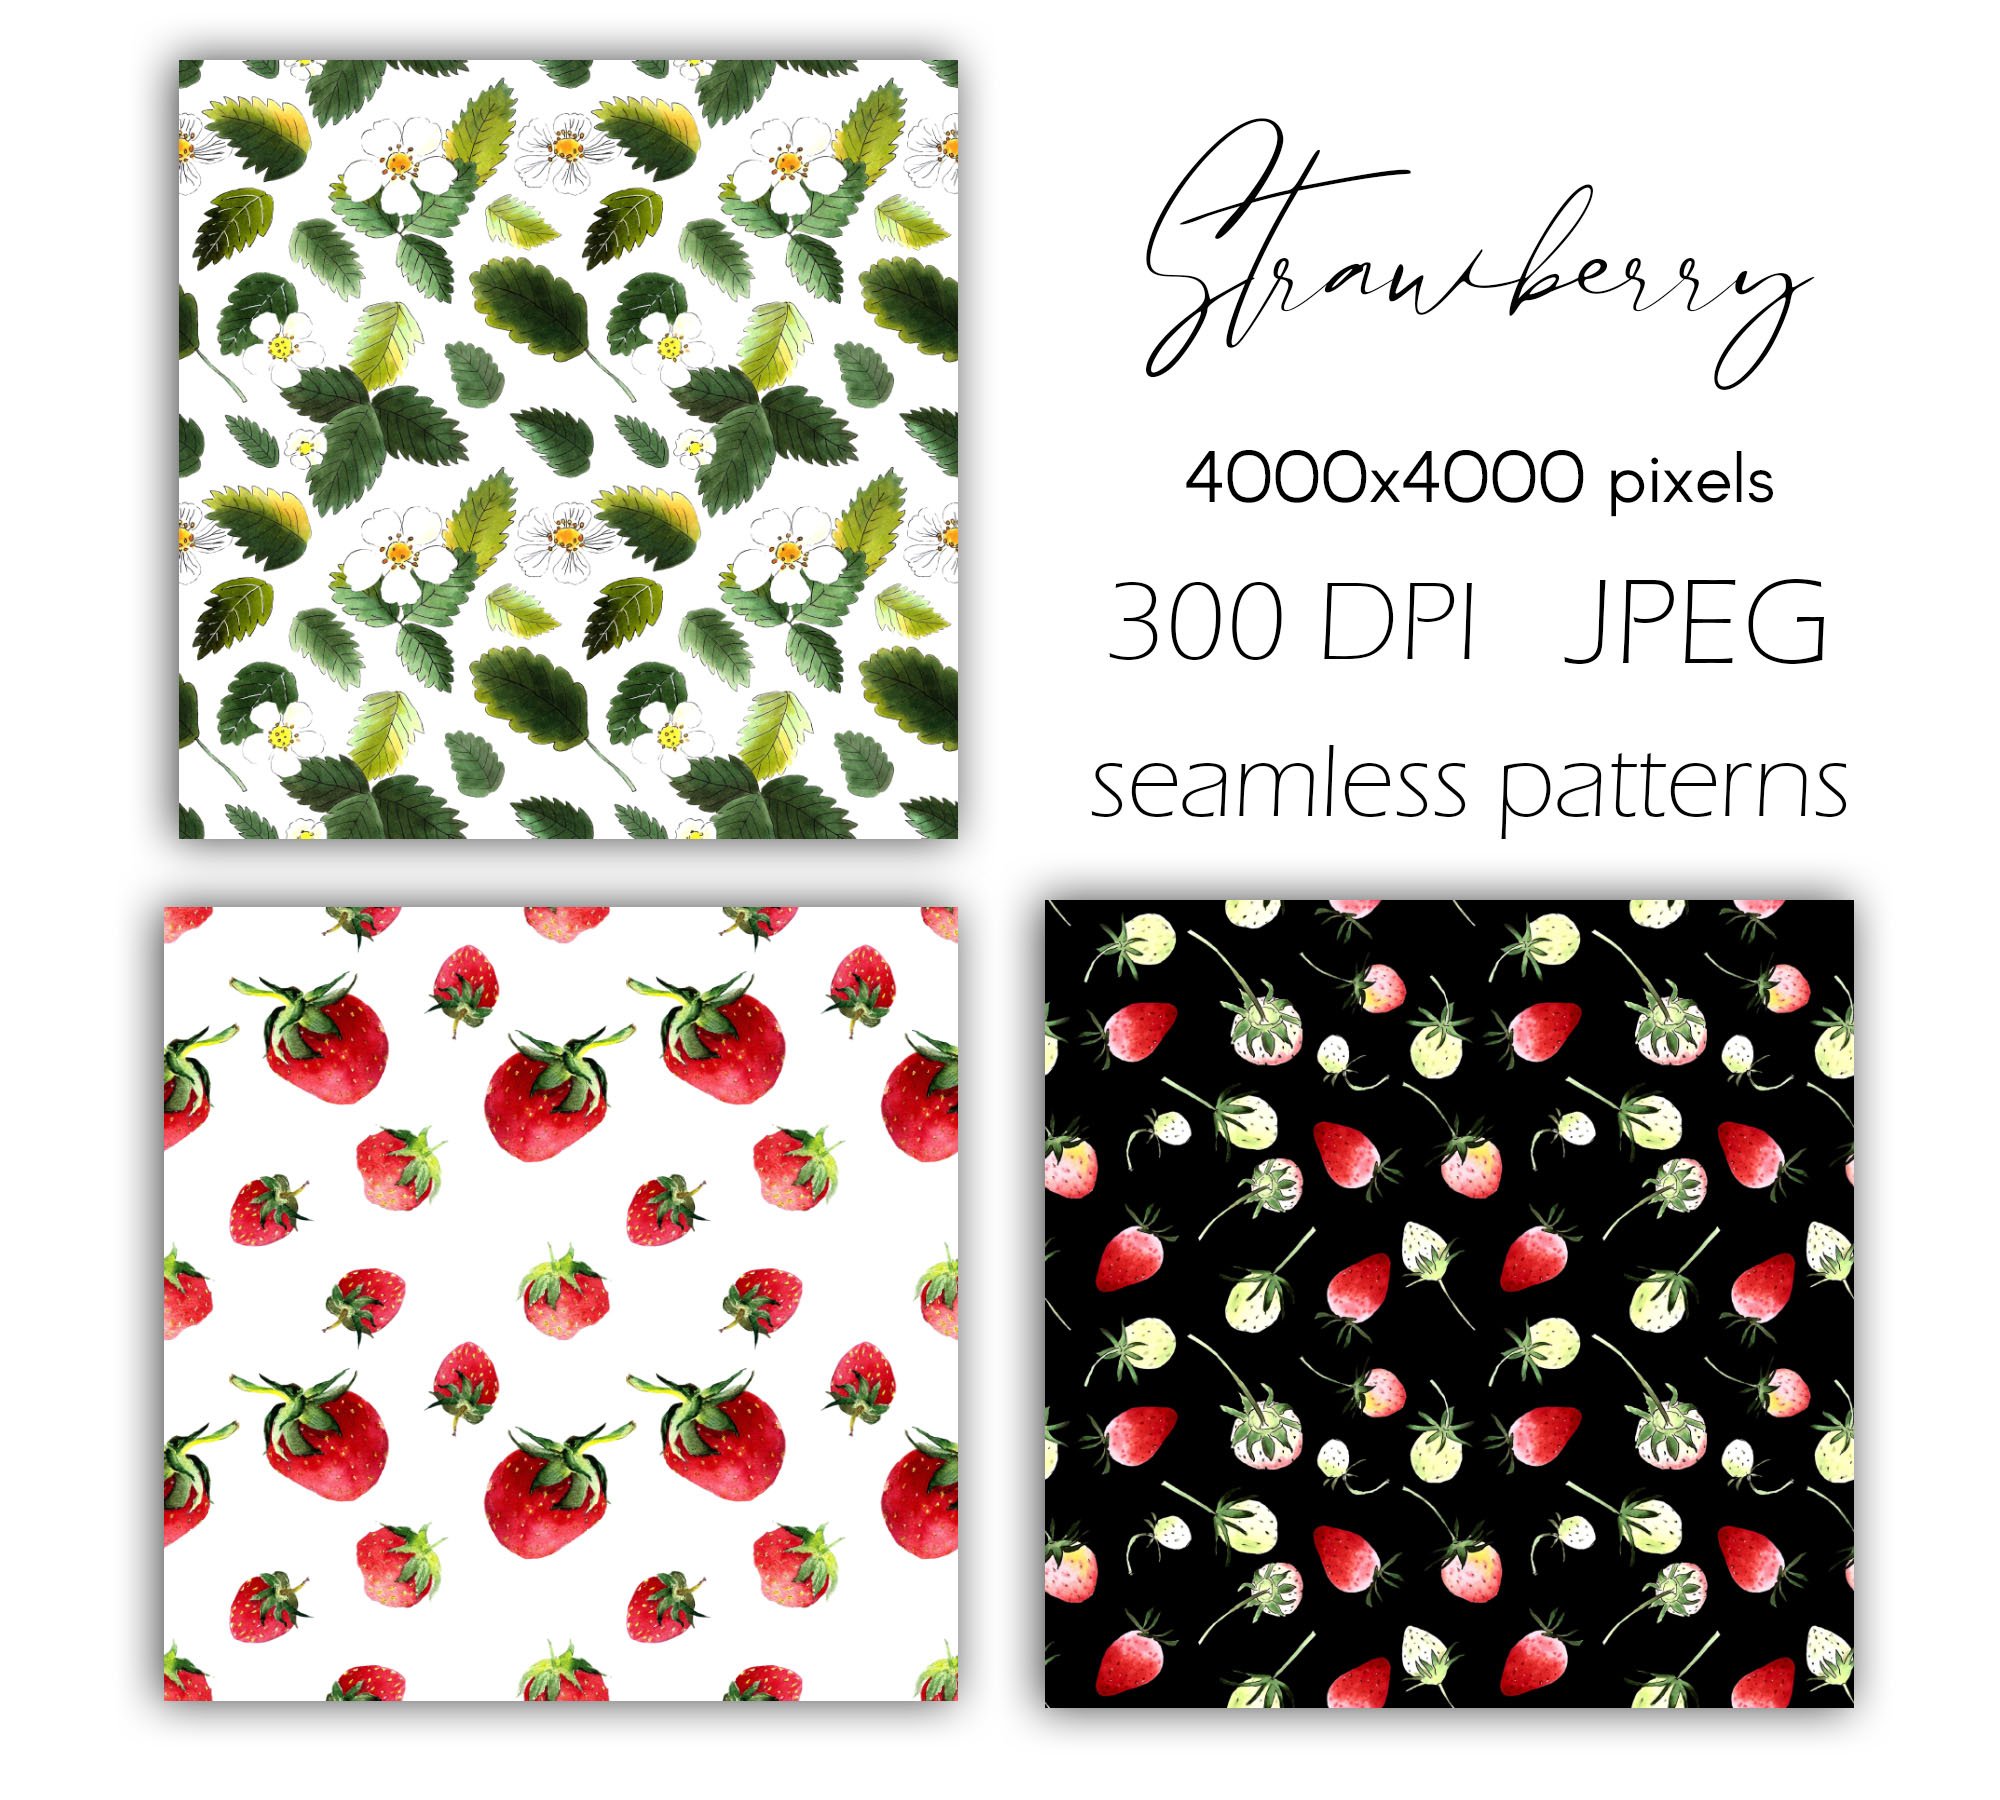 A set of 3 different seamless patterns with strawberry.